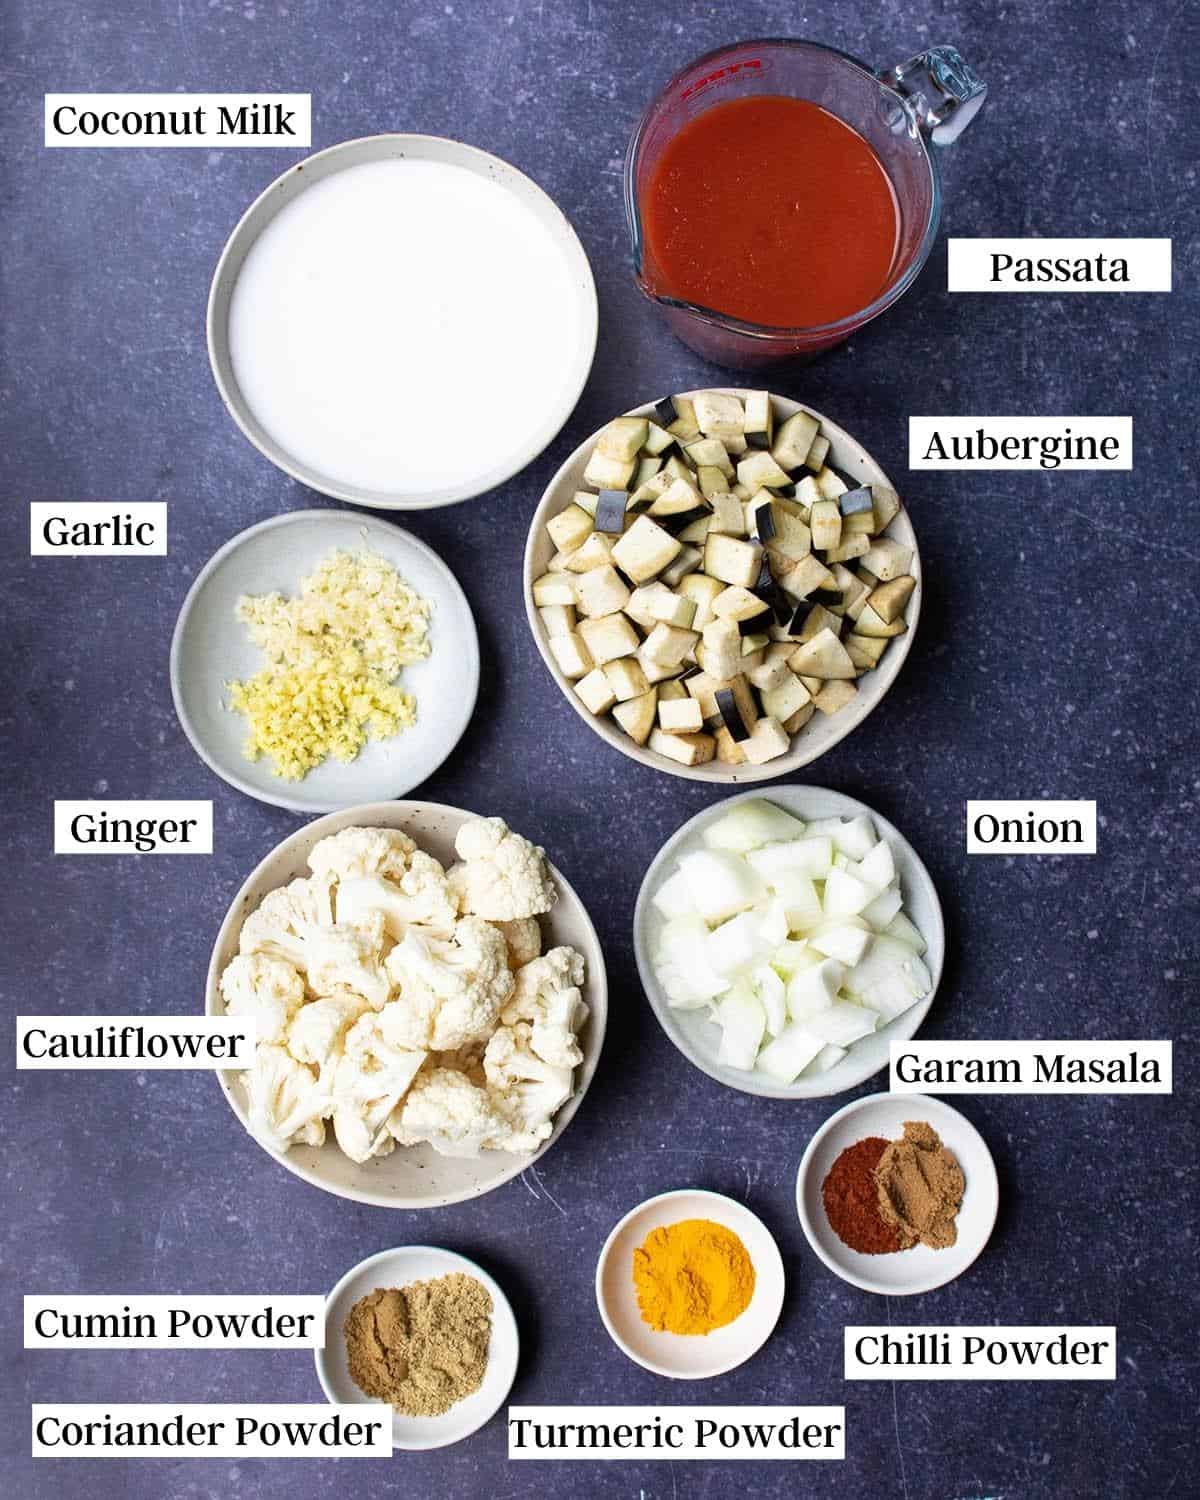 Ingredients in bowls on a dark work surface, labelled with text.